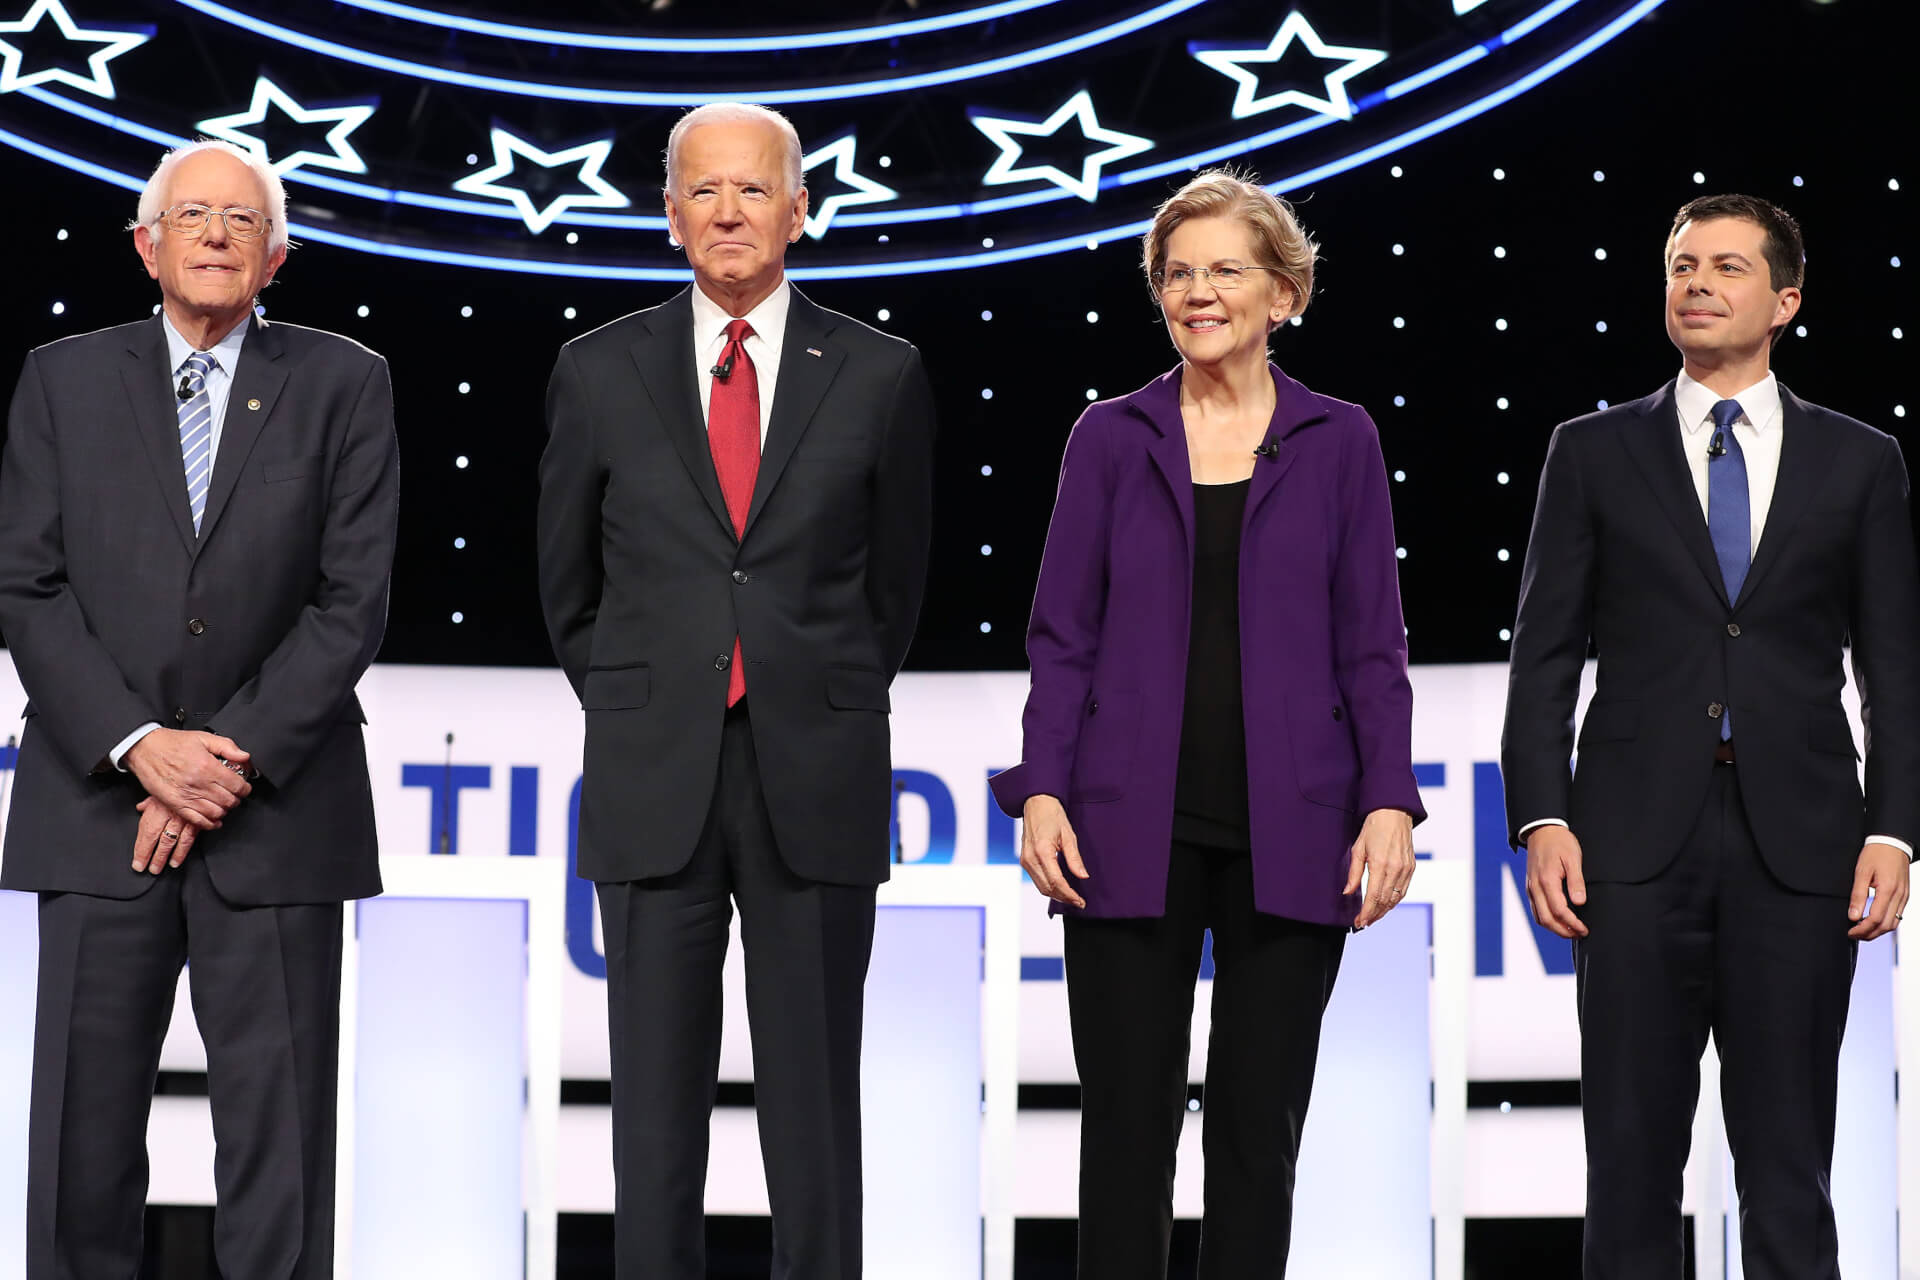 Tokenism Amongst Democratic Presidential Candidates: A Trumpian Malaise?